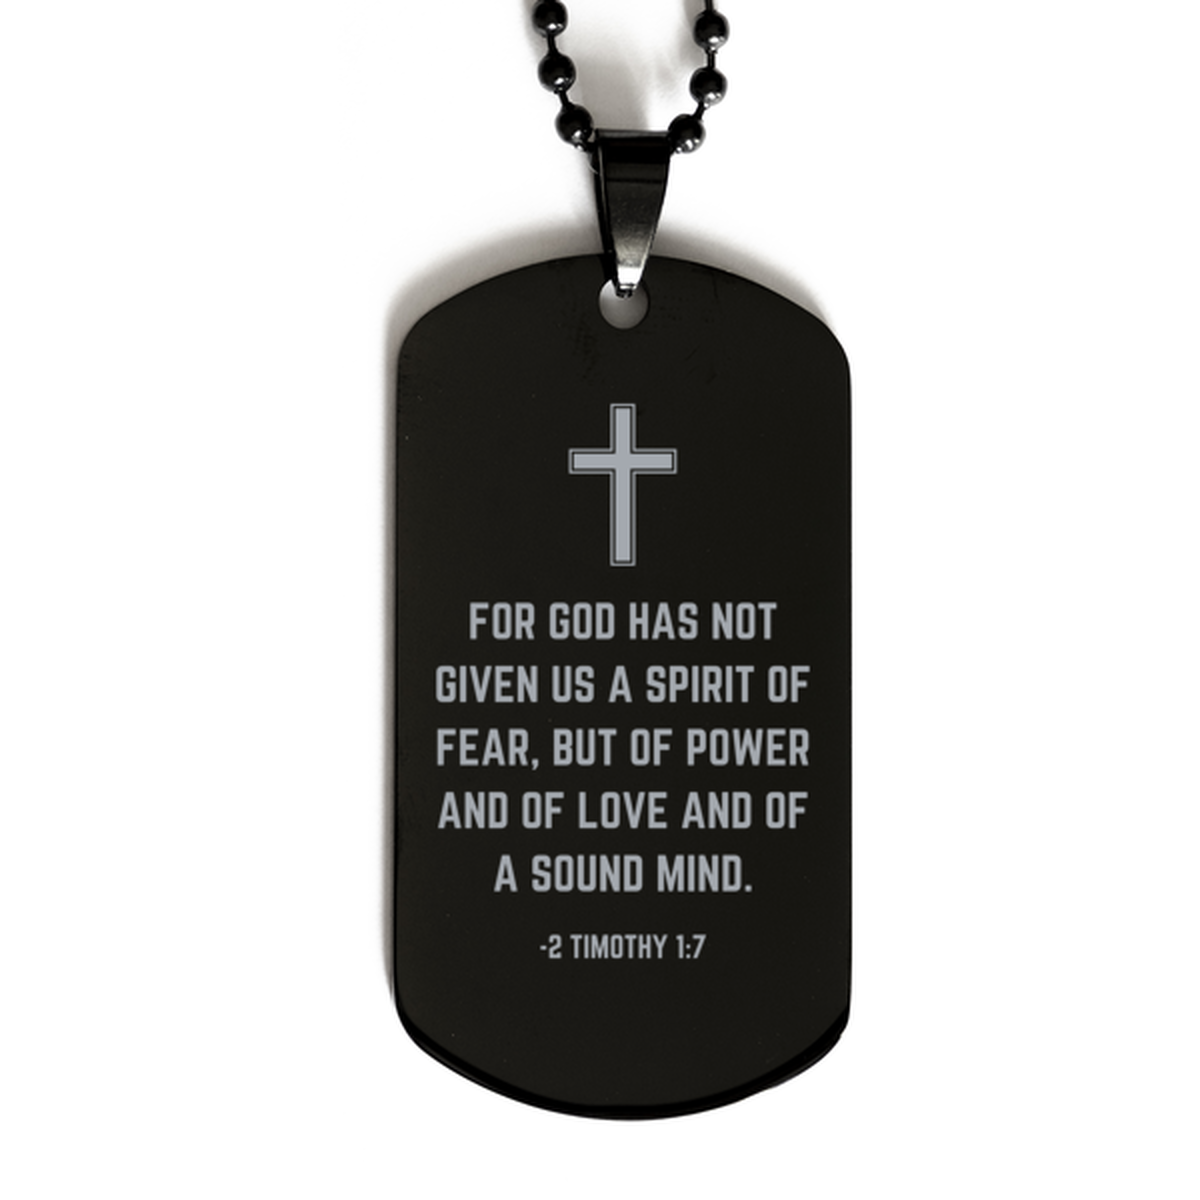 Baptism Gifts For Teenage Boys Girls, Christian Bible Verse Black Dog Tag, For God has not given us, Confirmation Gifts, Bible Verse Necklace for Son, Godson, Grandson, Nephew